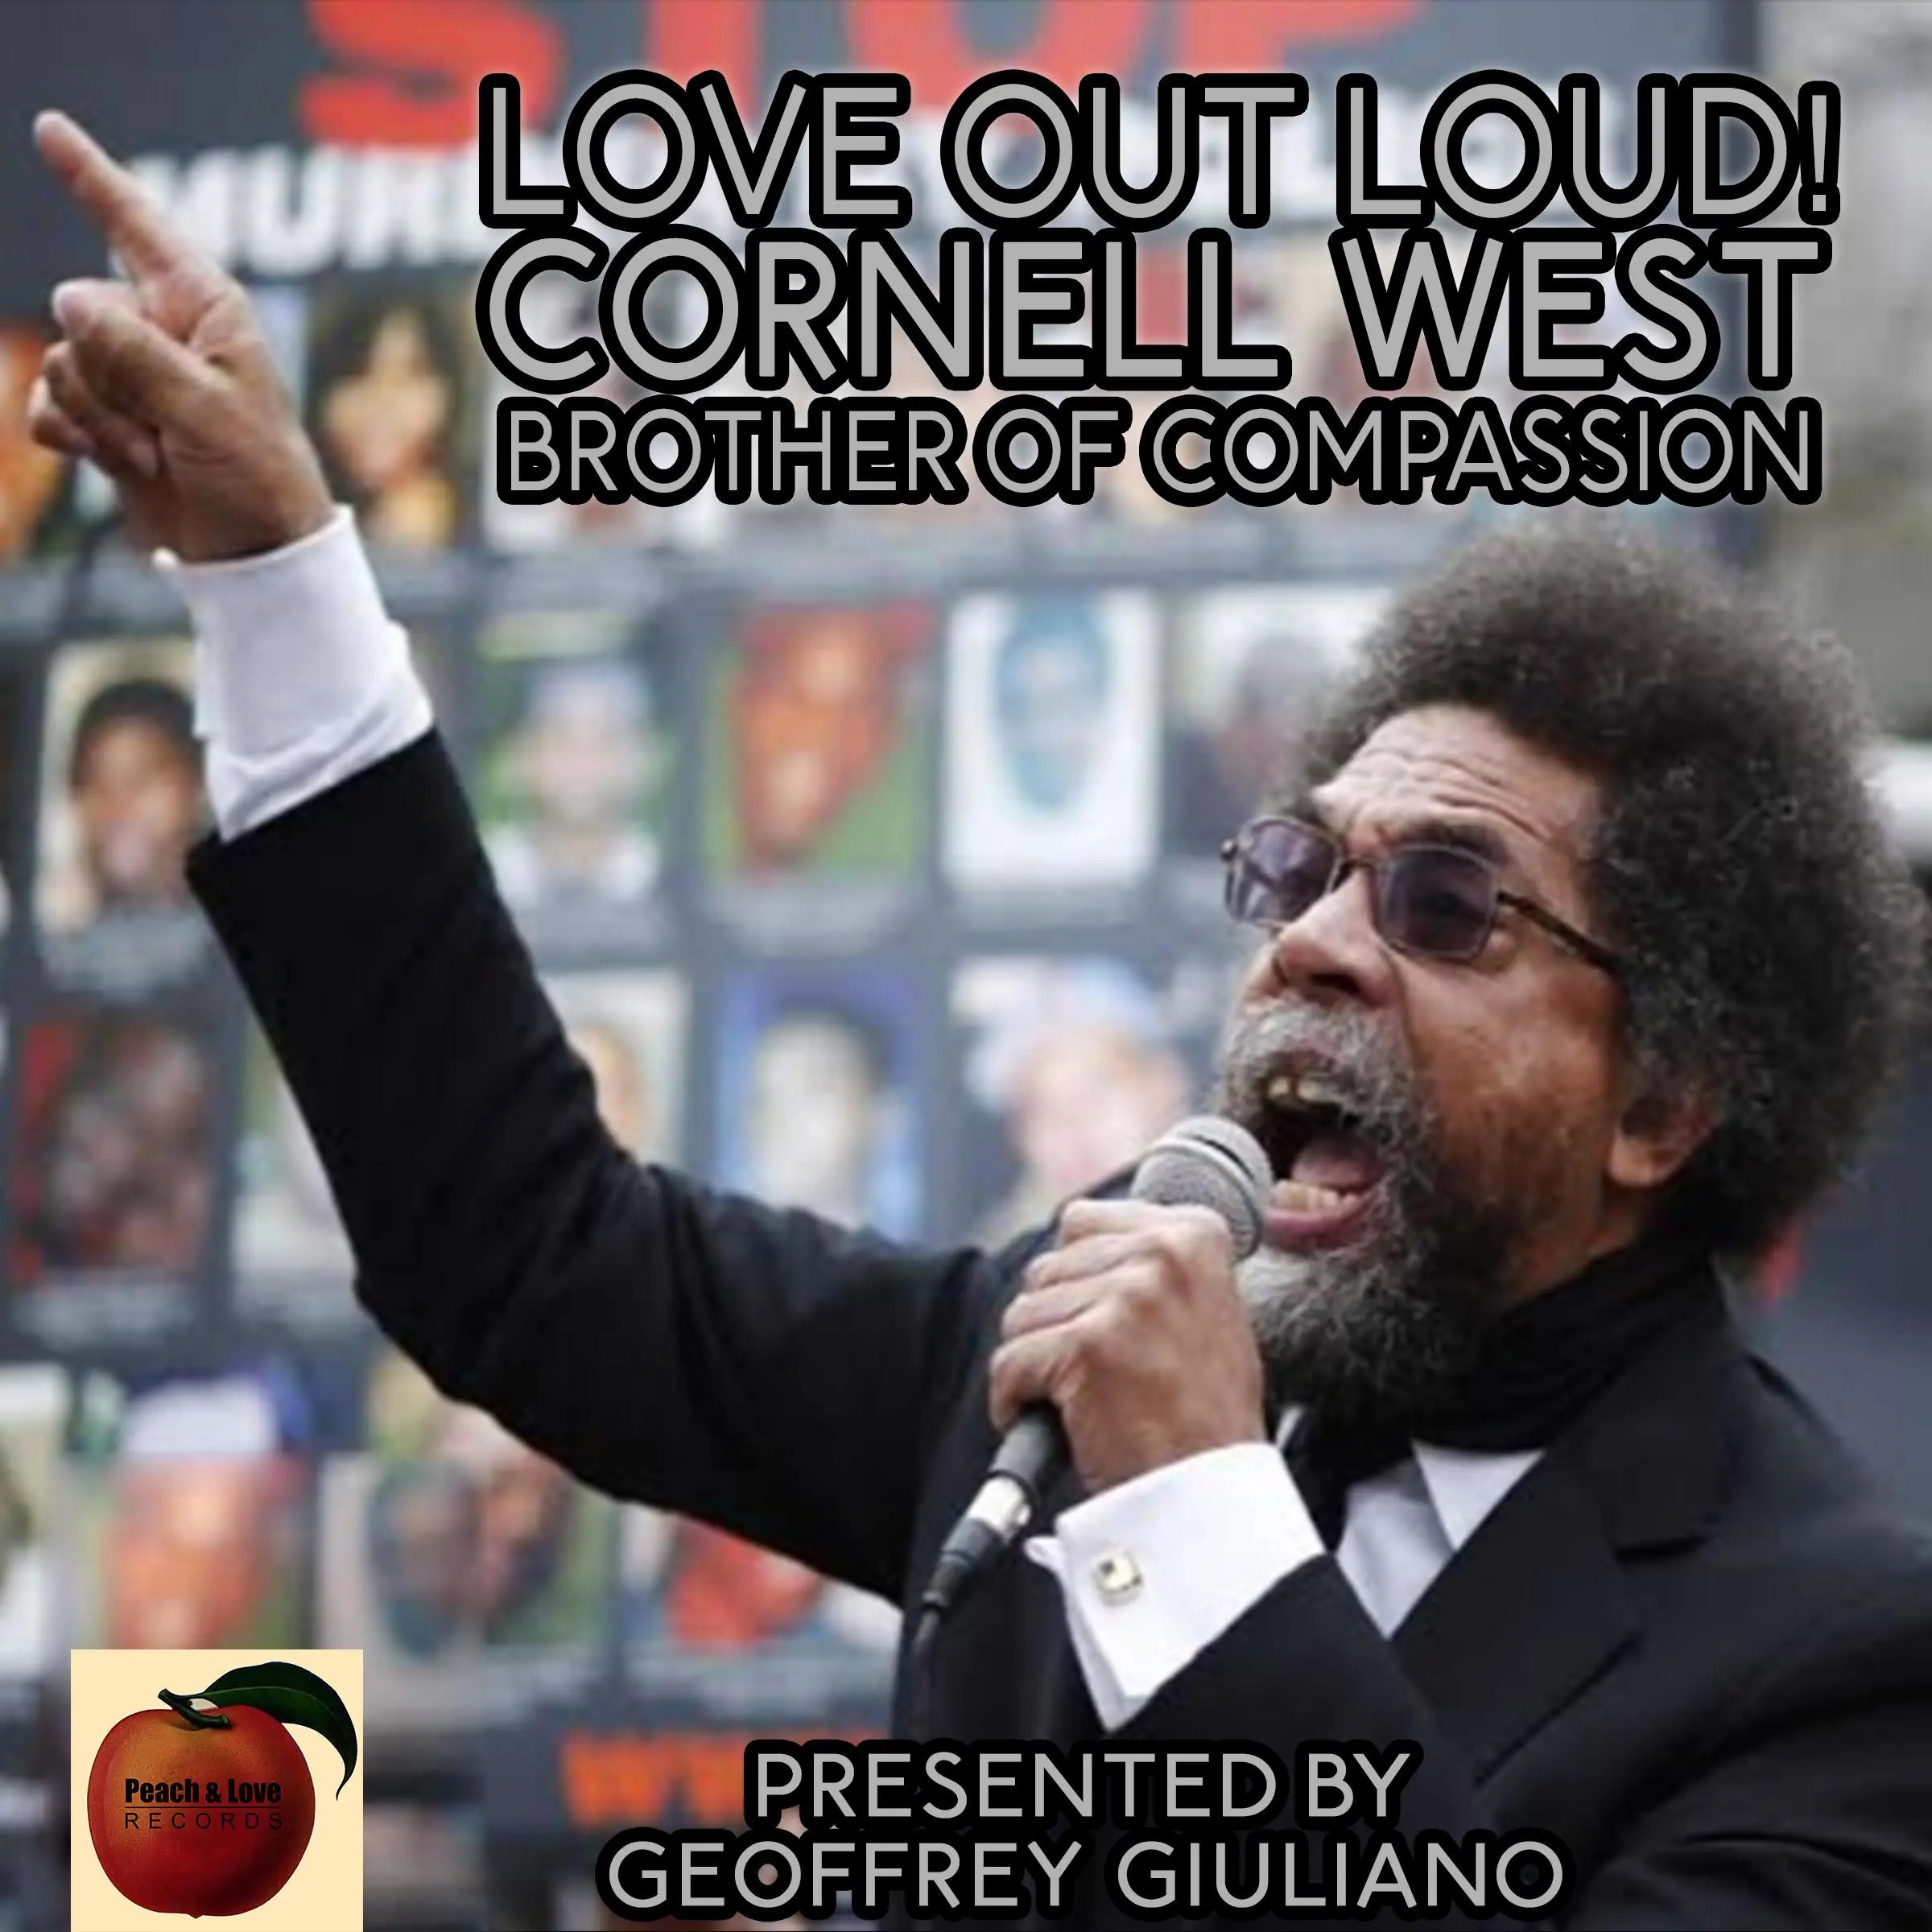 Love Out Loud! Cornel West; Brother of Compassion Audiobook by Geoffrey Giuliano